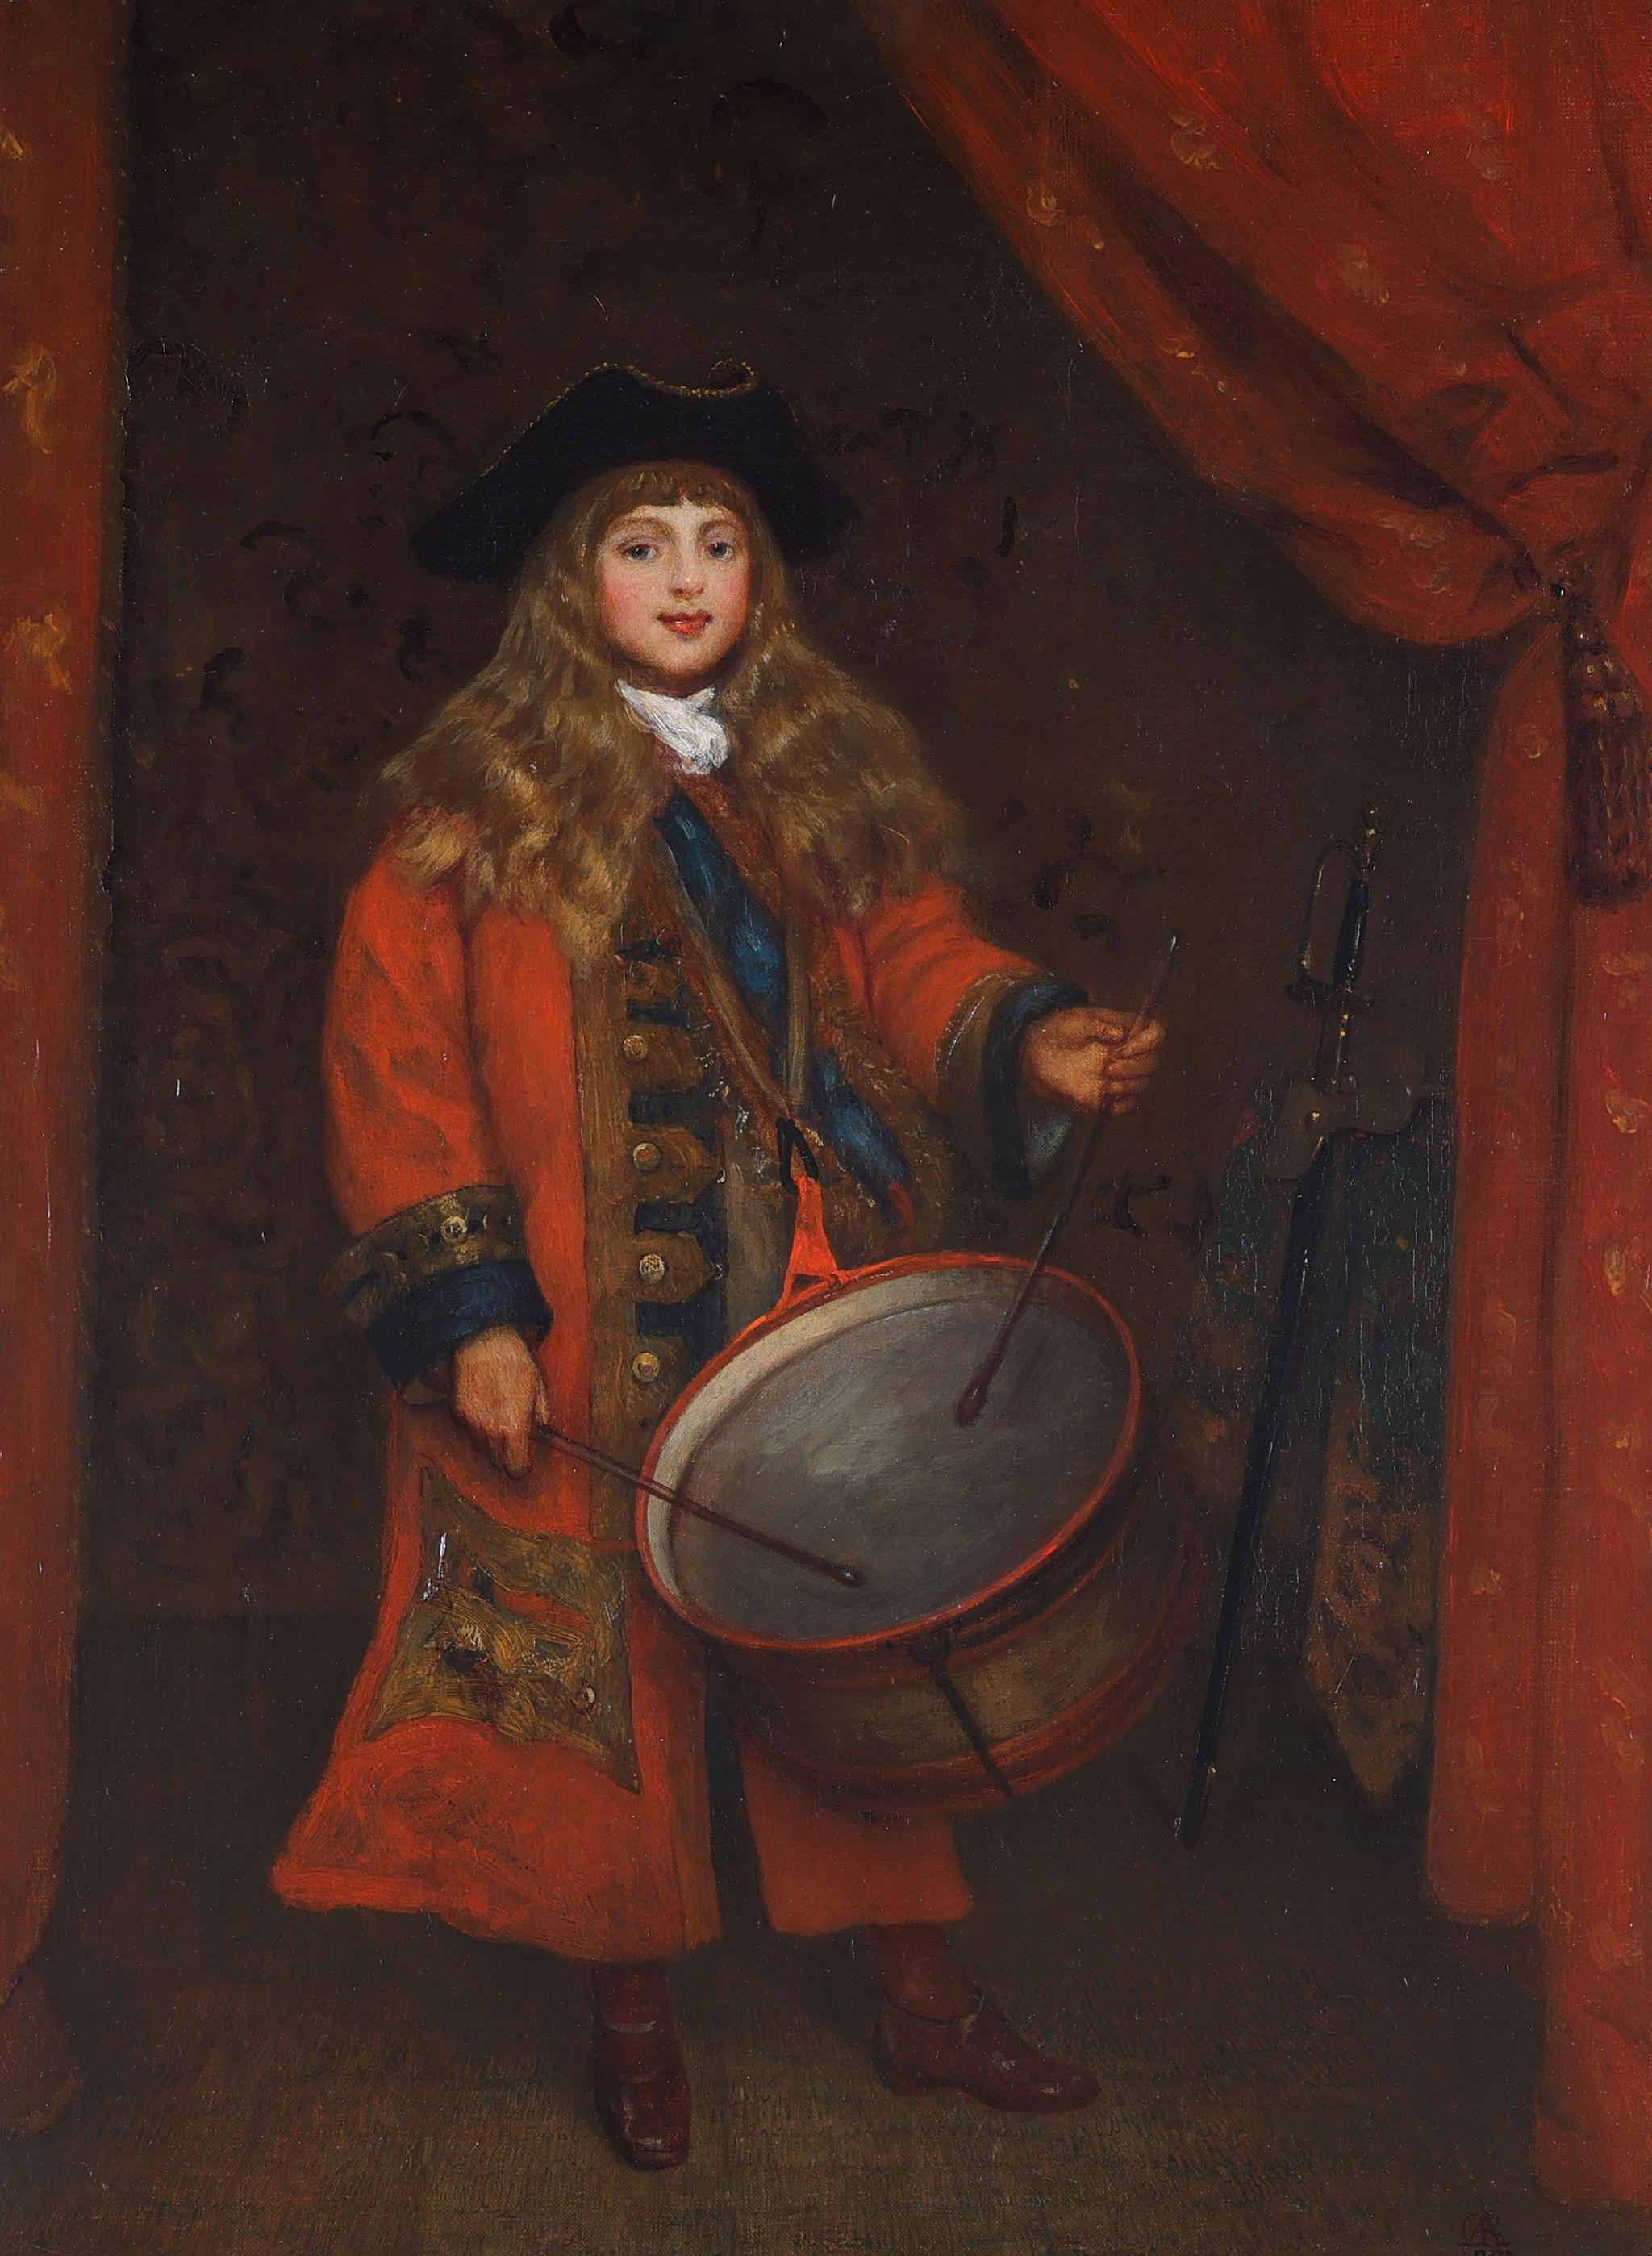 The Drummer Boy - Painting by George Storey RA